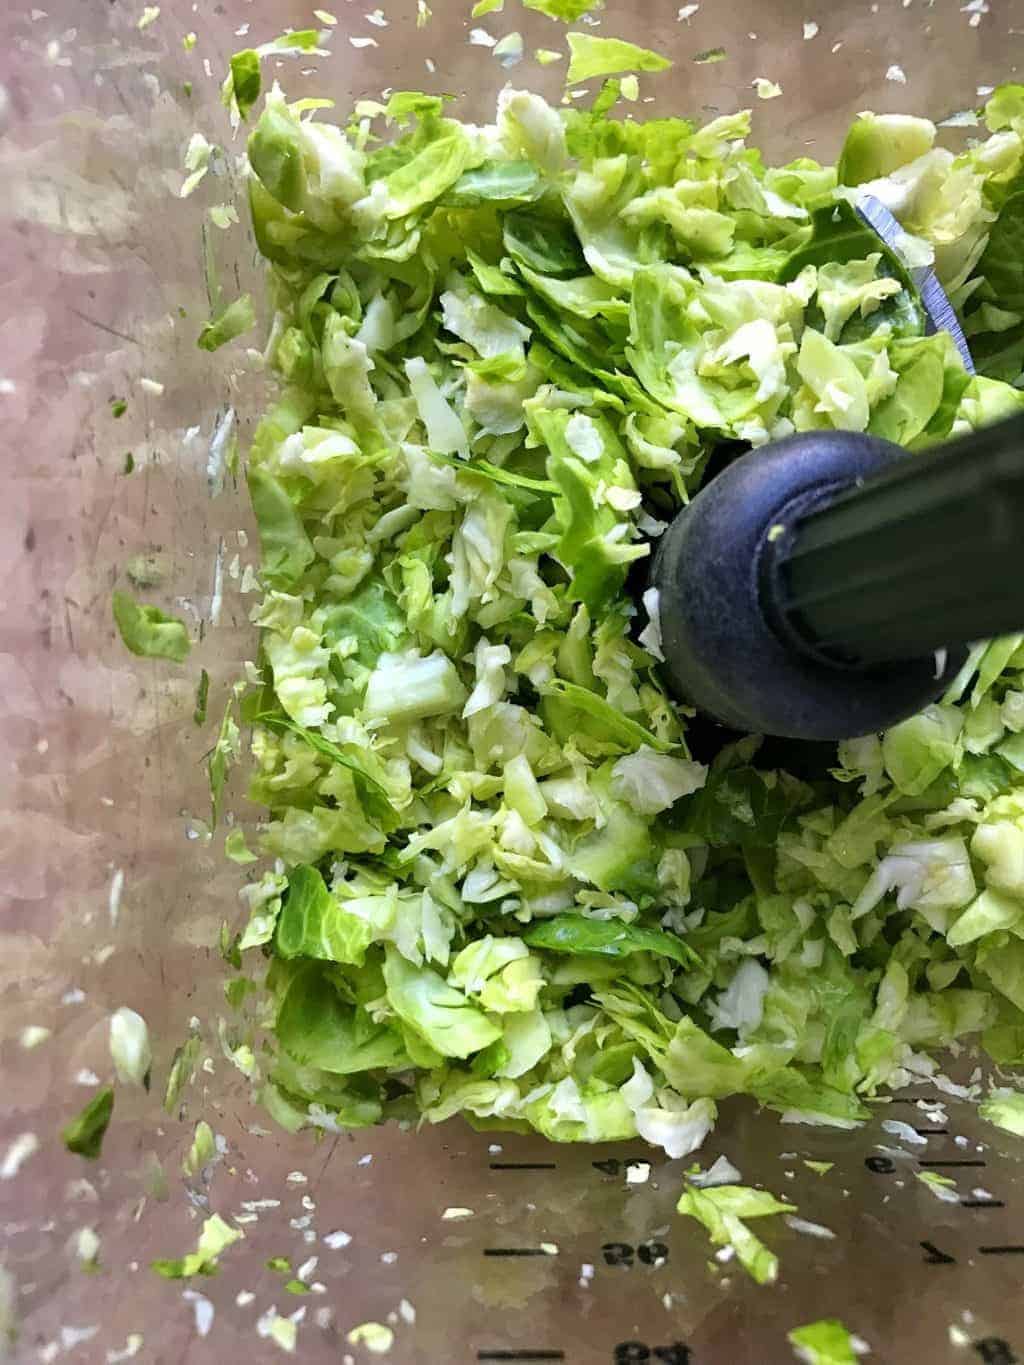 Shredded Brussels sprouts shown in a blender getting shredded.